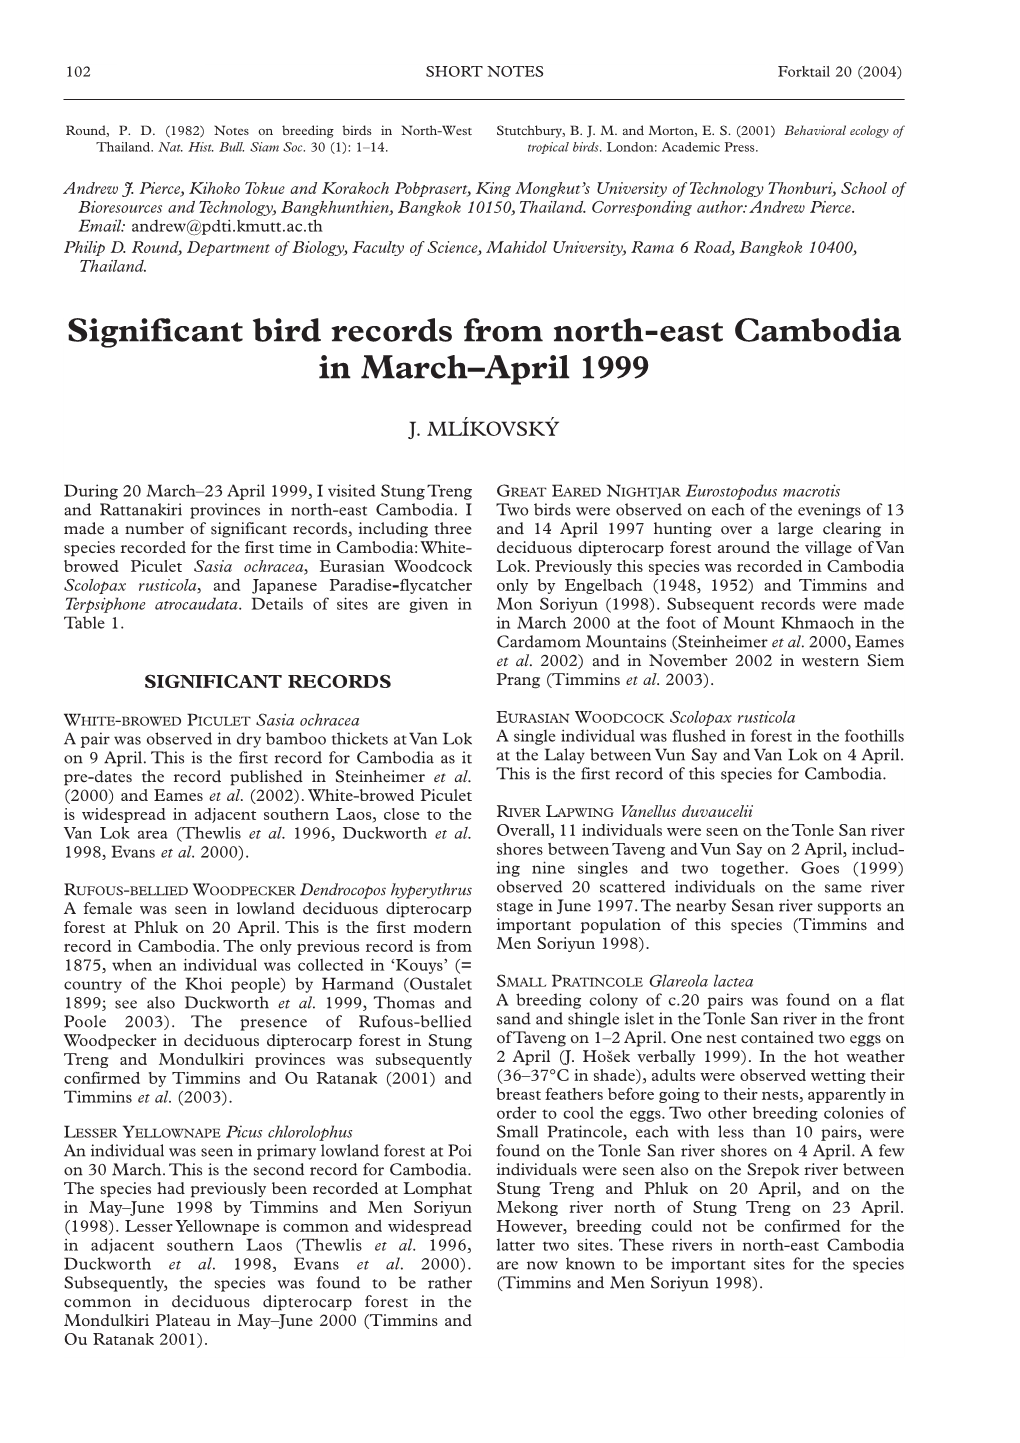 Significant Bird Records from North-East Cambodia in March–April 1999